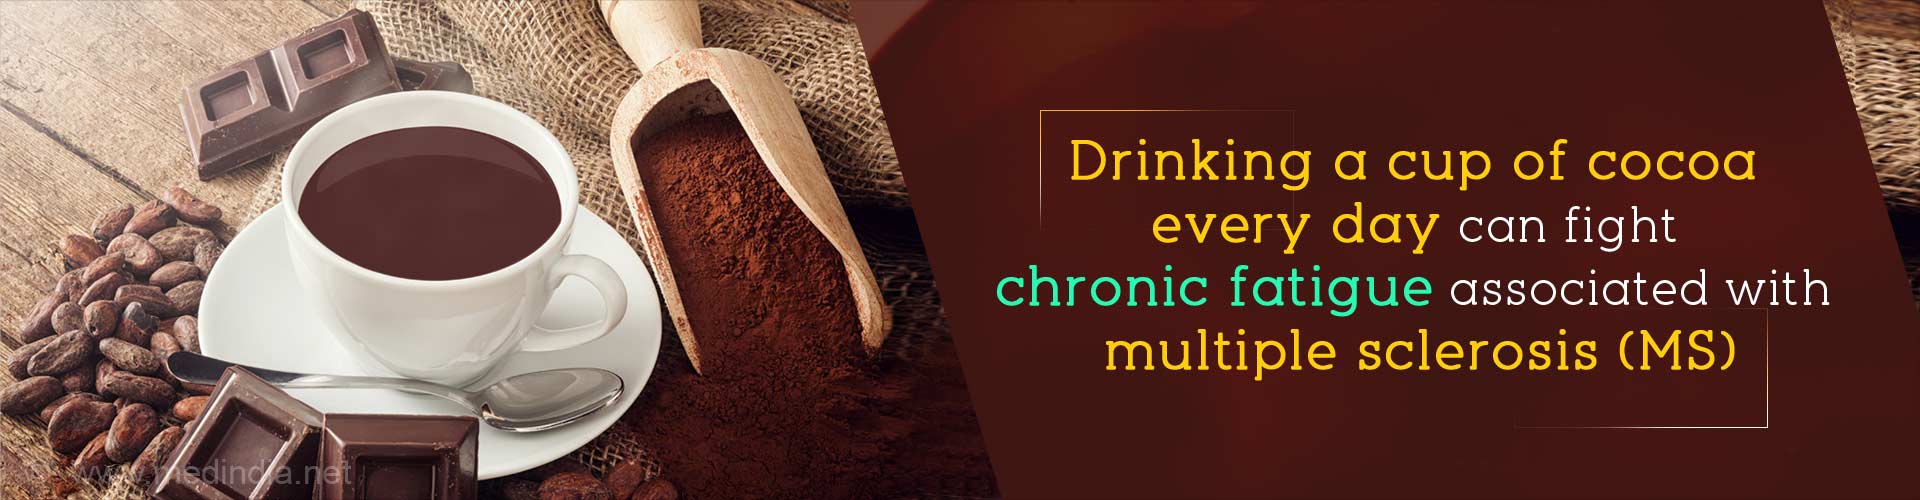 Drinking a cup of cocoa every day can fight chronic fatigue associated with multiple sclerosis (MS).